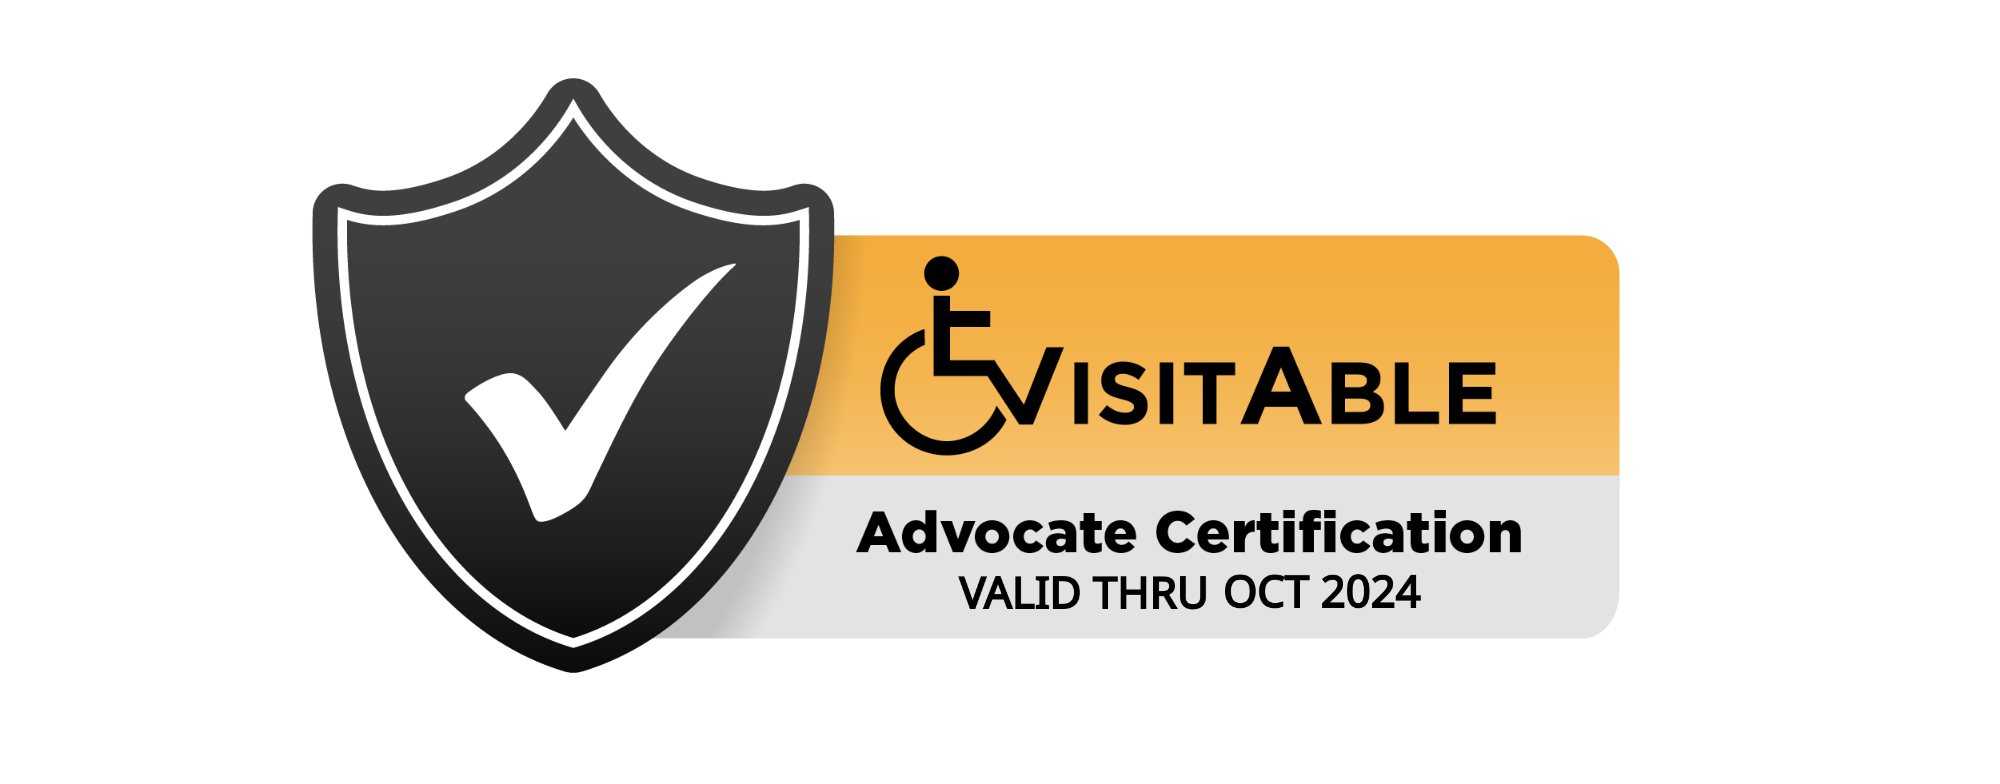 See our VisitAble Advocate Certification